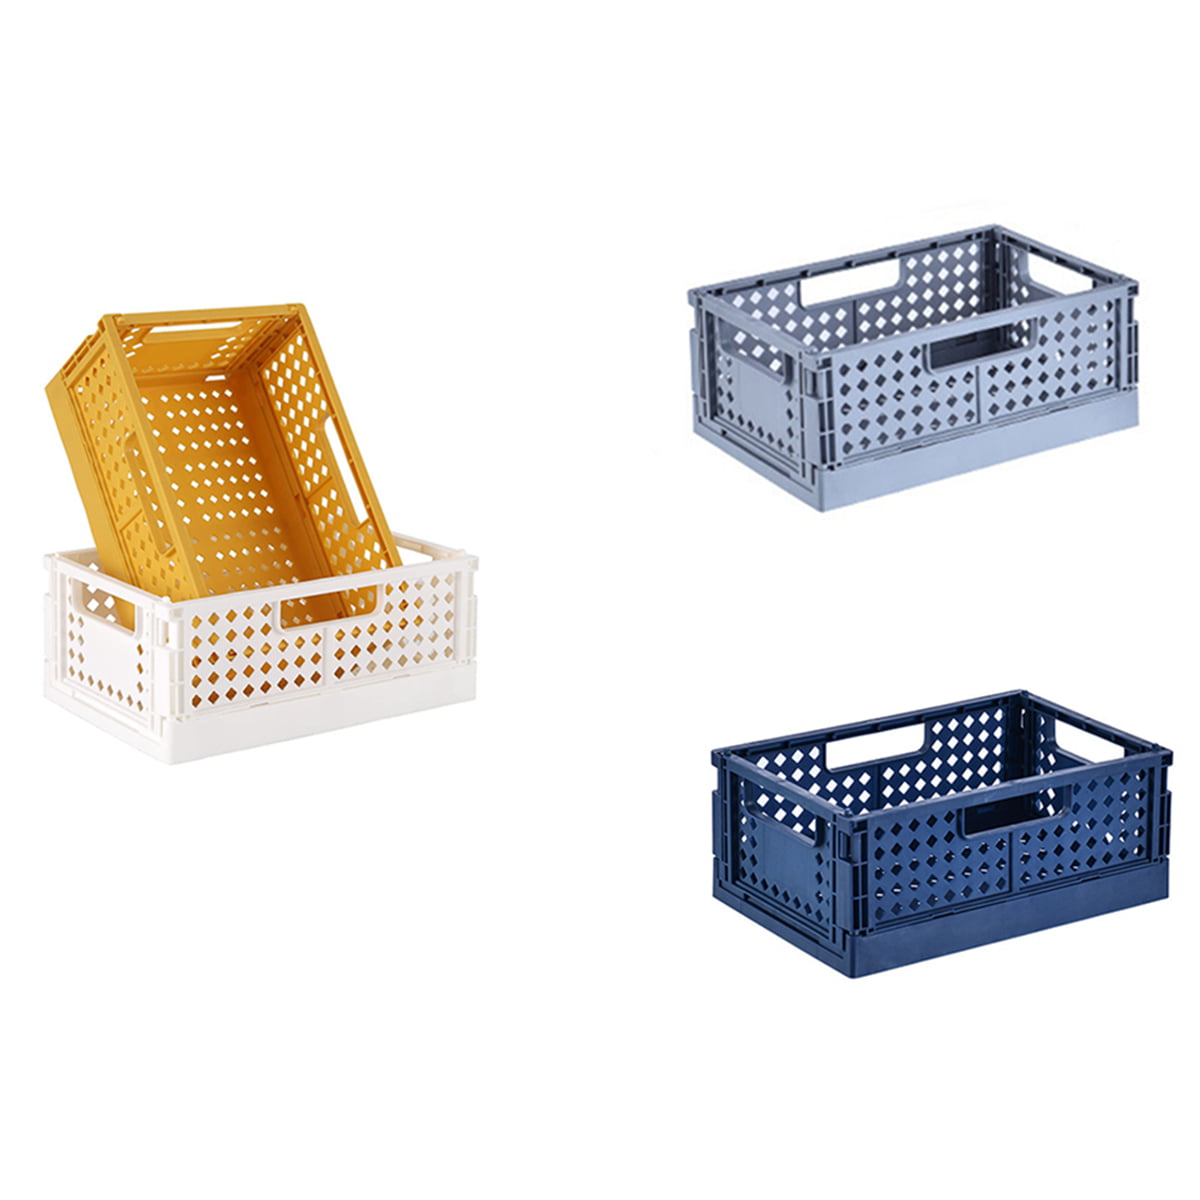 Durable and Reliable Plastic Storage Bins 4 Pack Pastel Crates Mini for Shelf Storage Organizing Ideal for Home Kitchen,Bathroom,Classroom,and Office In Organization Storage Bins 6 x 3.98 x 2.45 